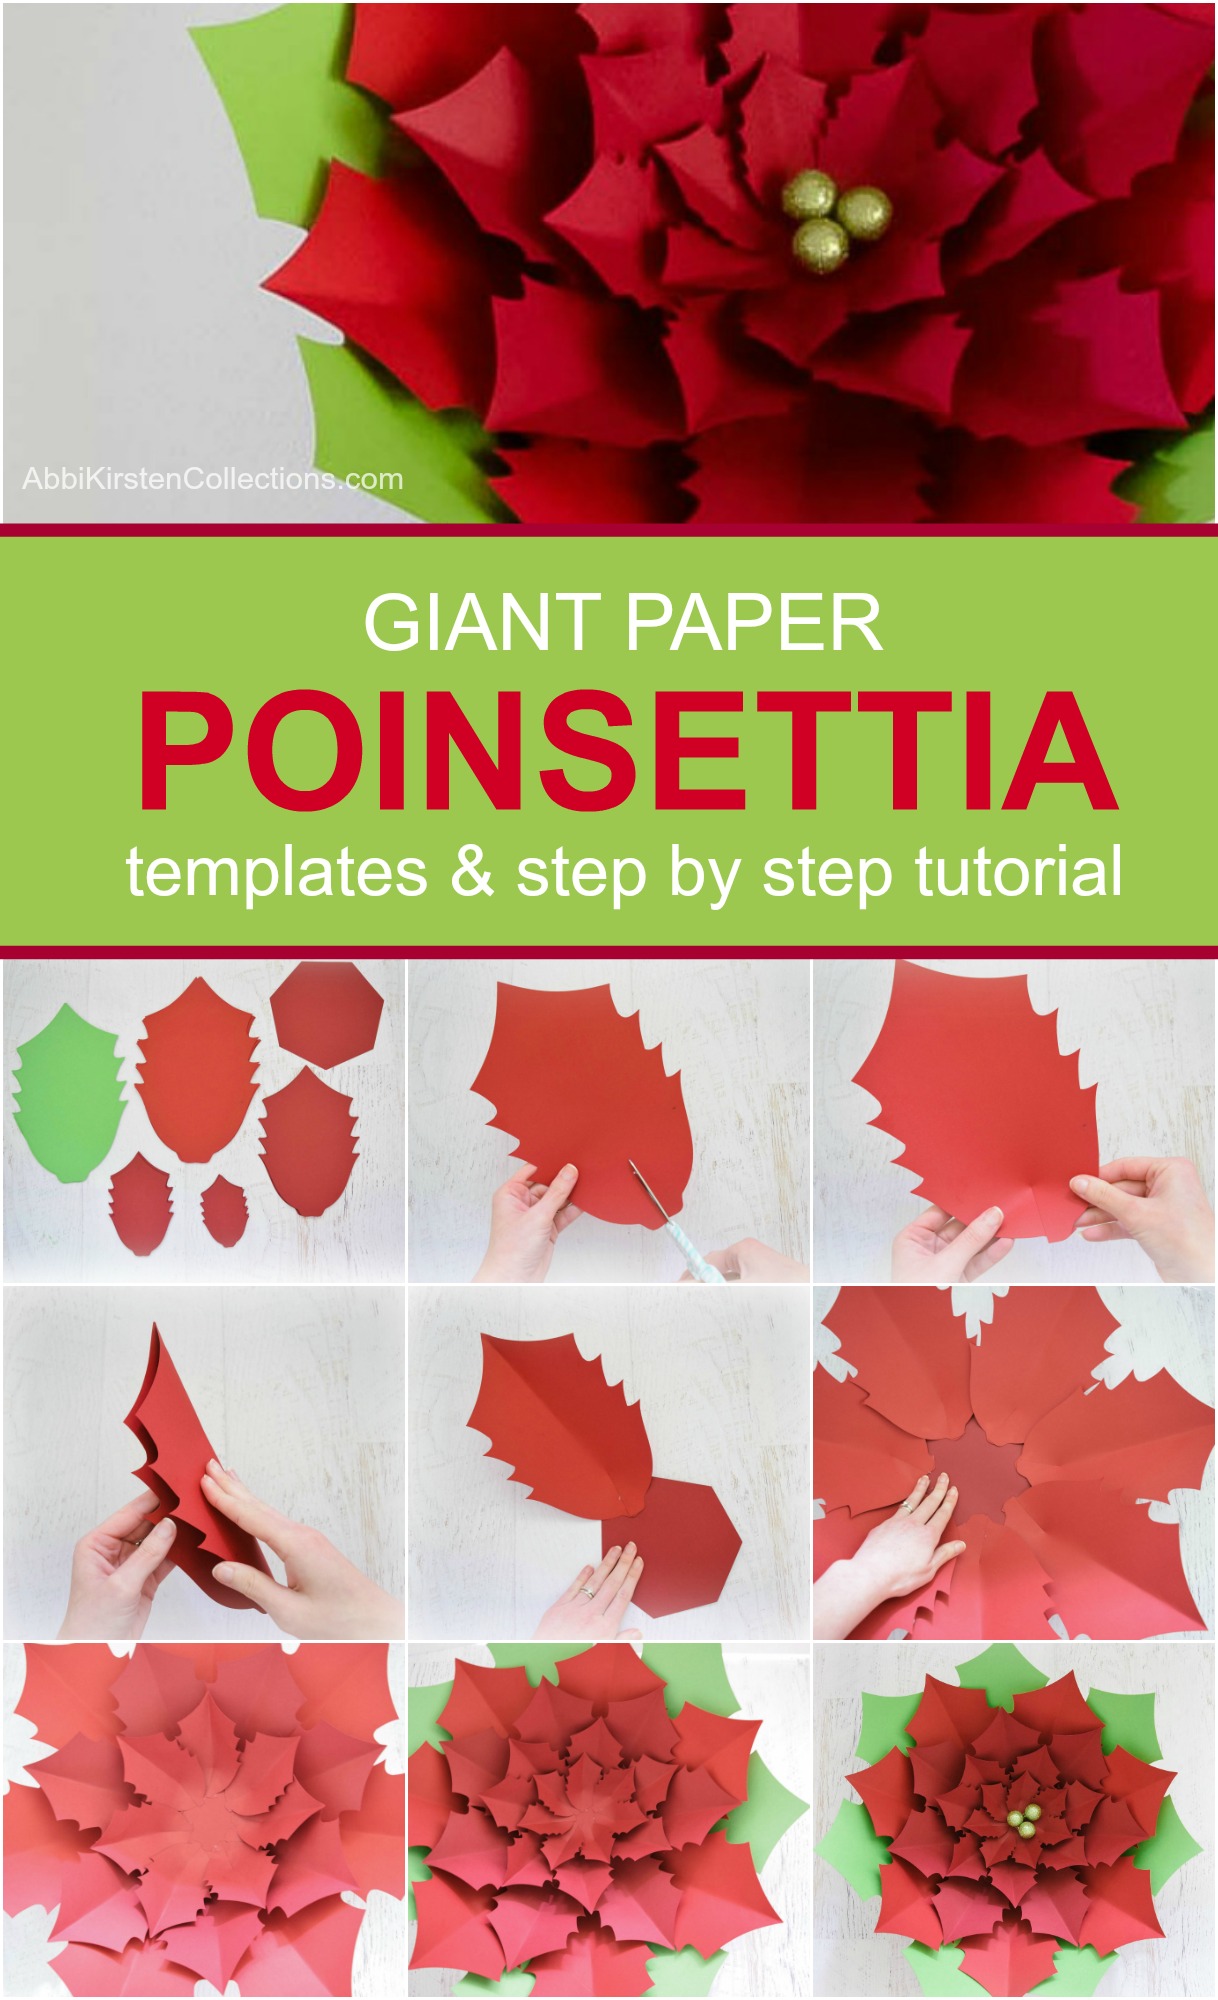 A collage of images shows all the steps involved in making a giant Noel Poinsettia paper flower, from cutting out the leaves and petals, to layering the petals, and the finished Poinsettia flower.